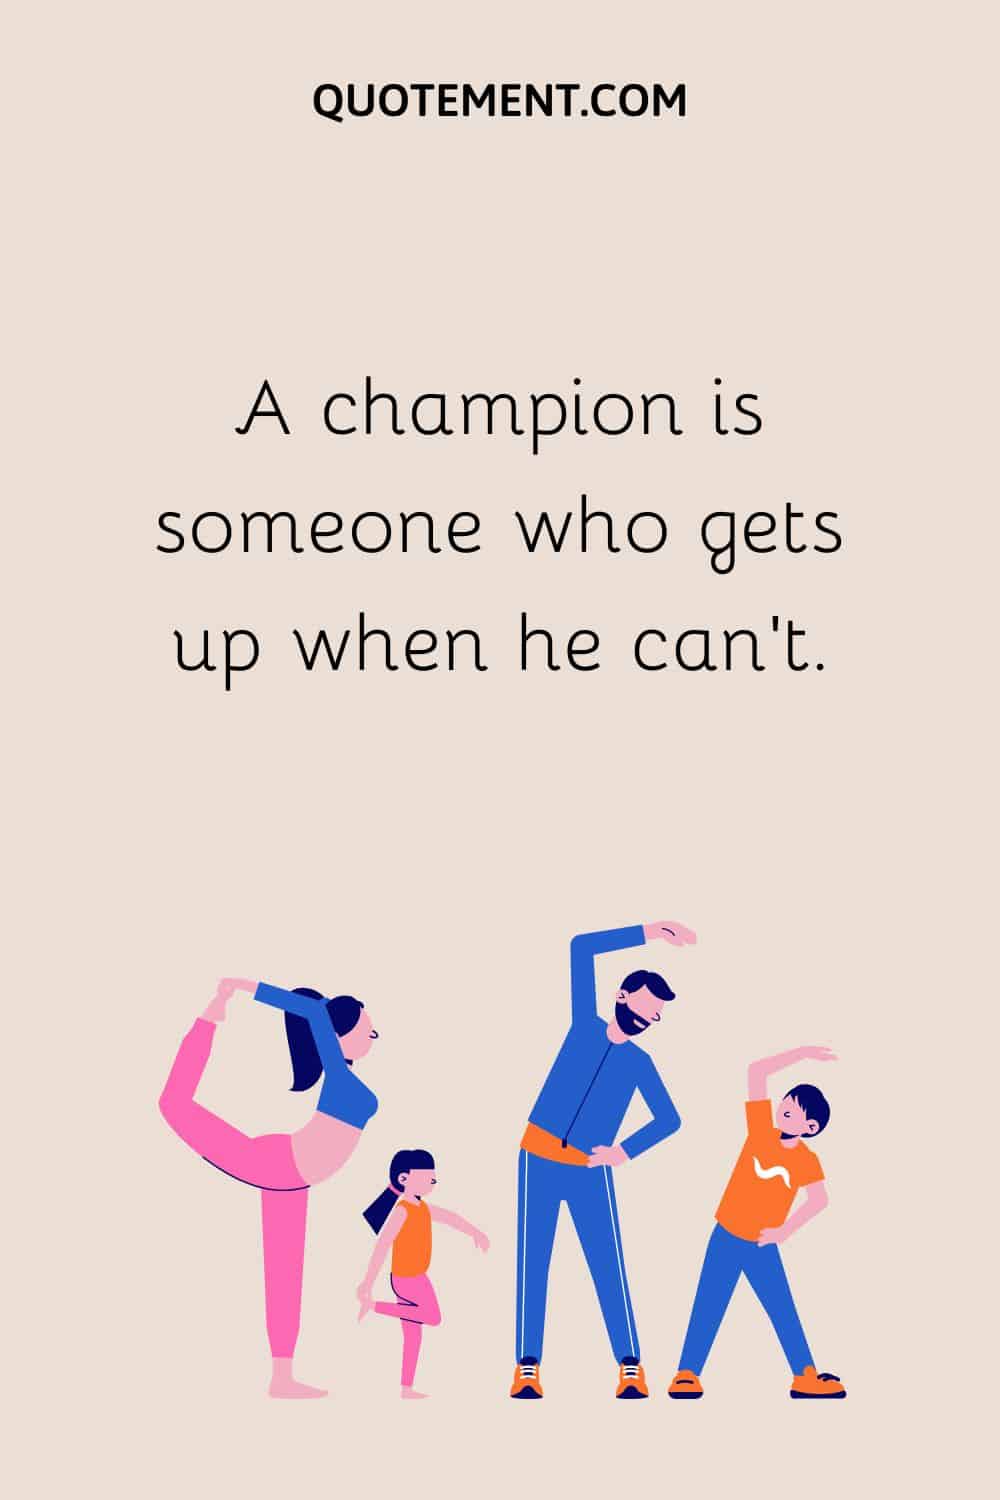 A champion is someone who gets up when he can’t.